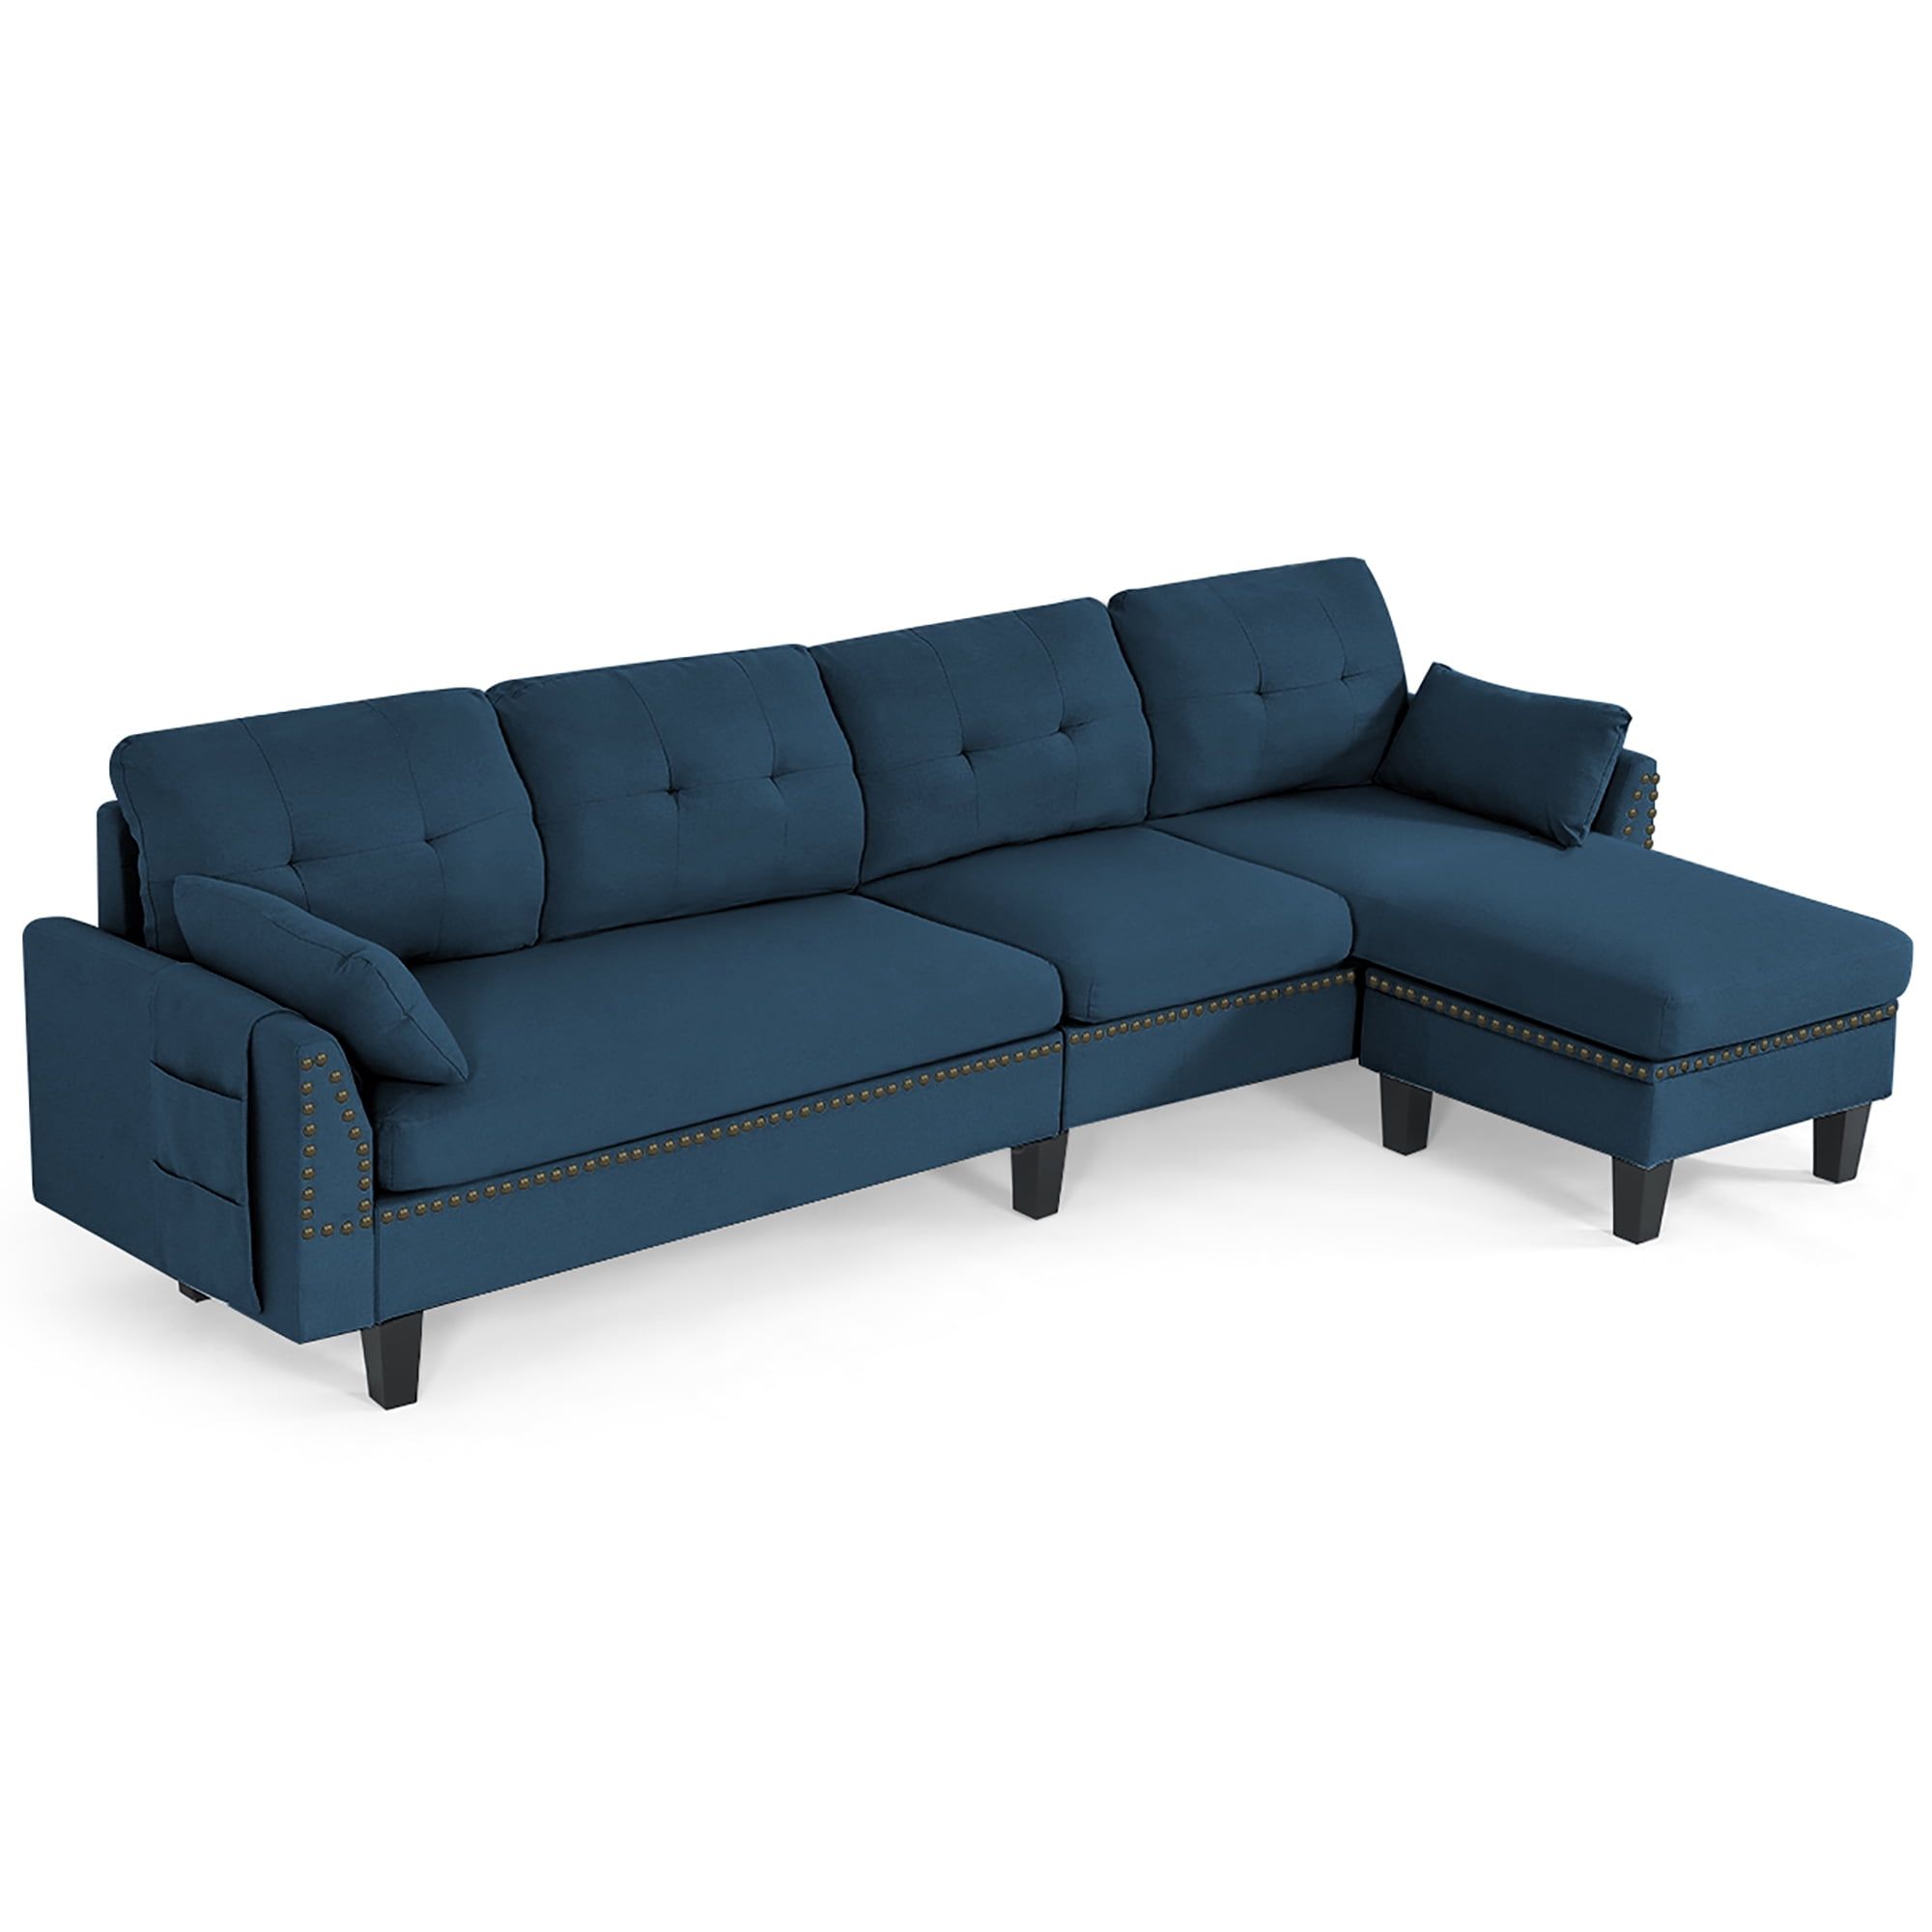 Costway Convertible Sectional Sofa Couch 4 Seat L Shaped Couch W For Convertible L Shaped Sectional Sofas (View 14 of 20)